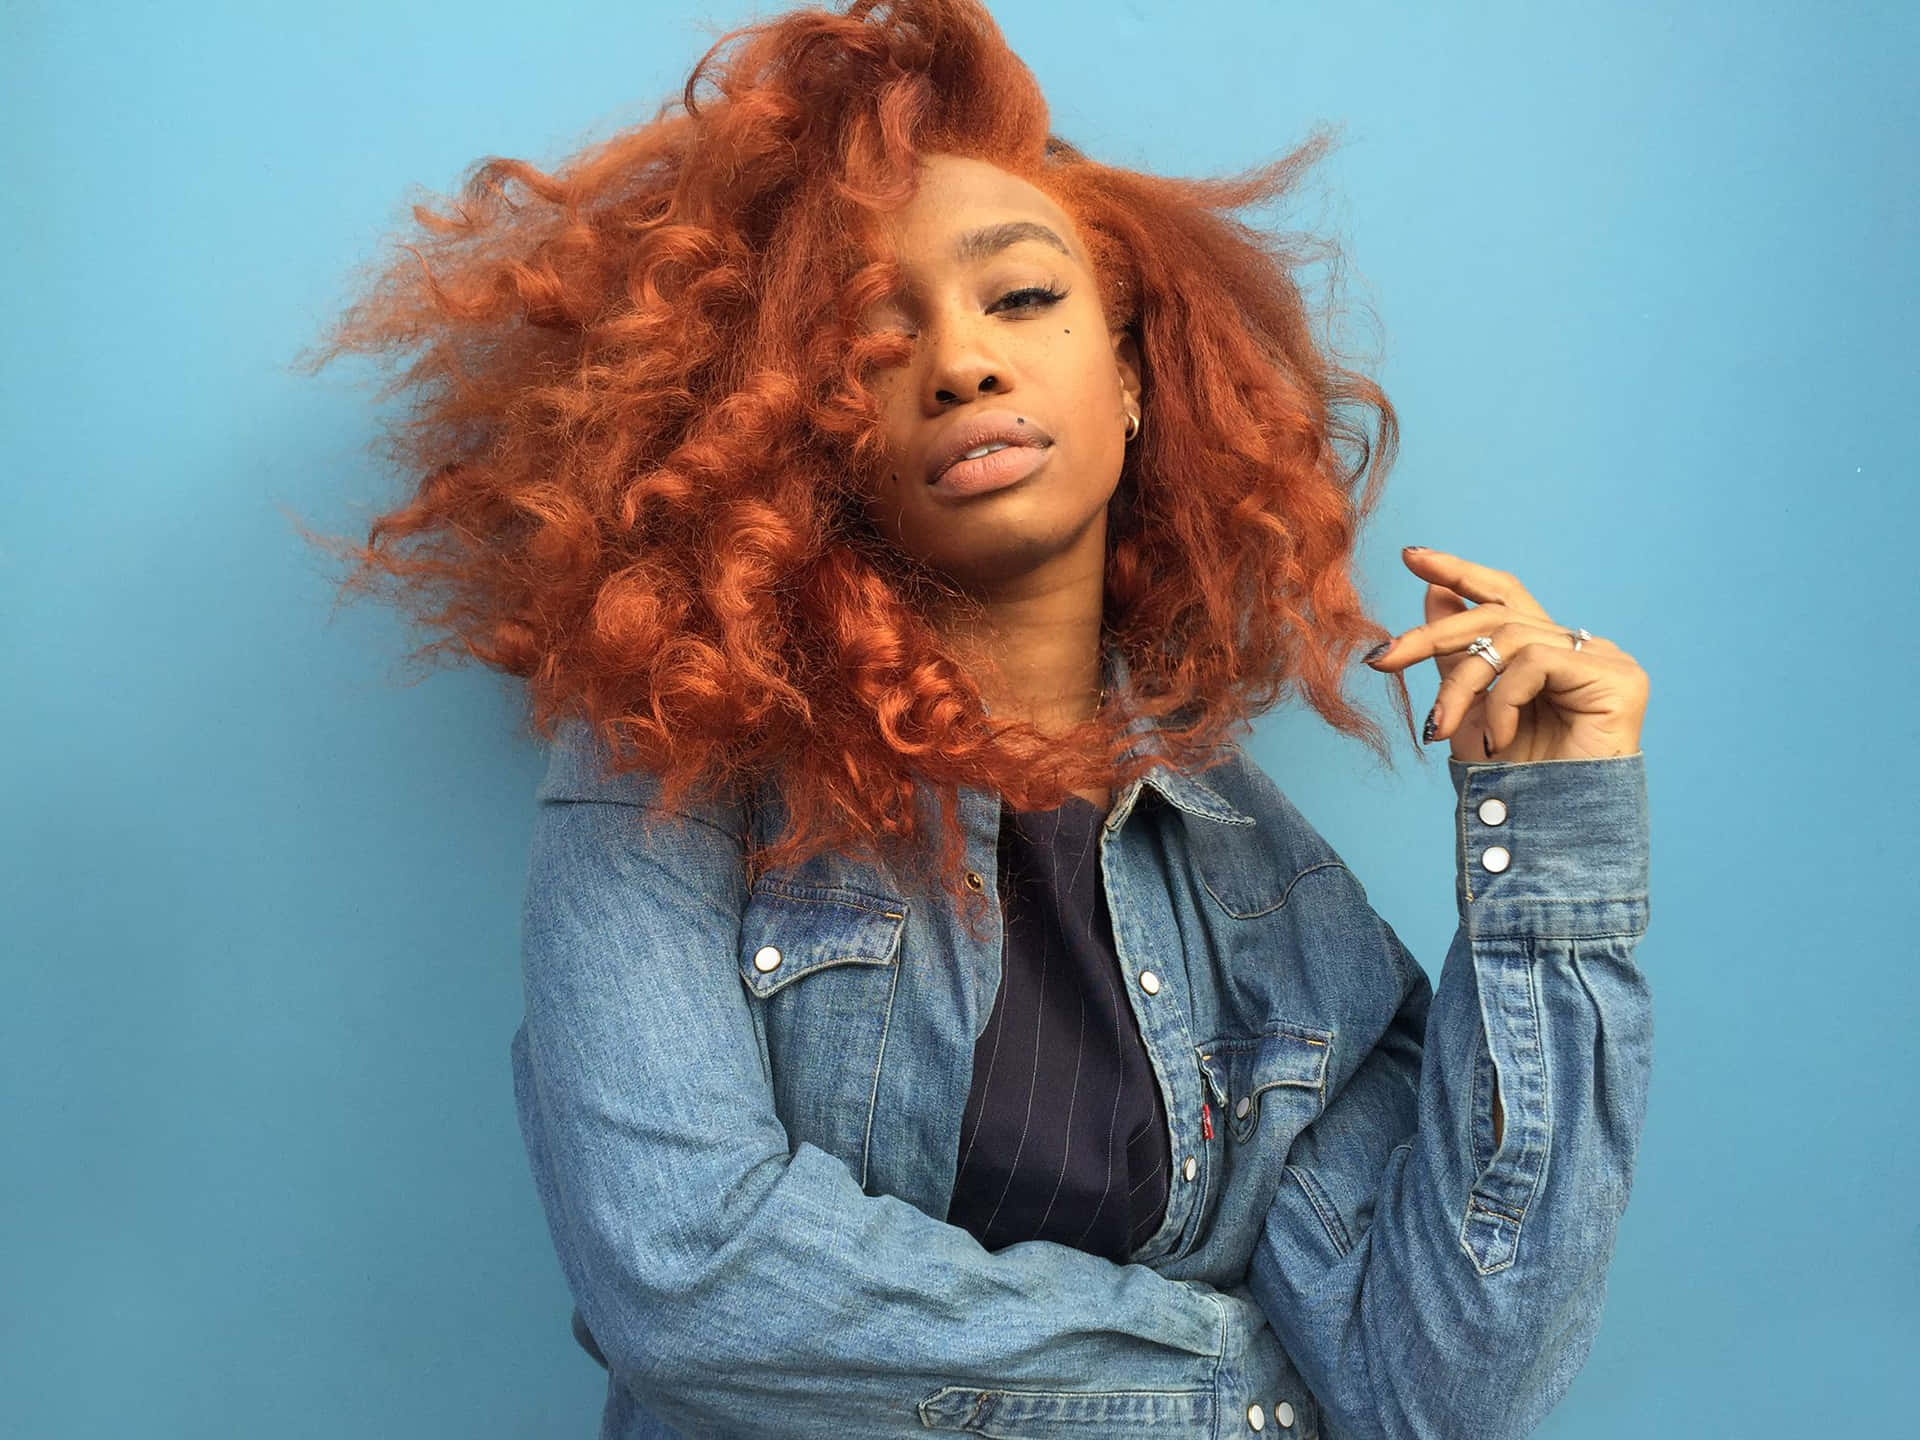 Sza in her iconic persona with blonde hair, sleek outfit, and gold chains Wallpaper